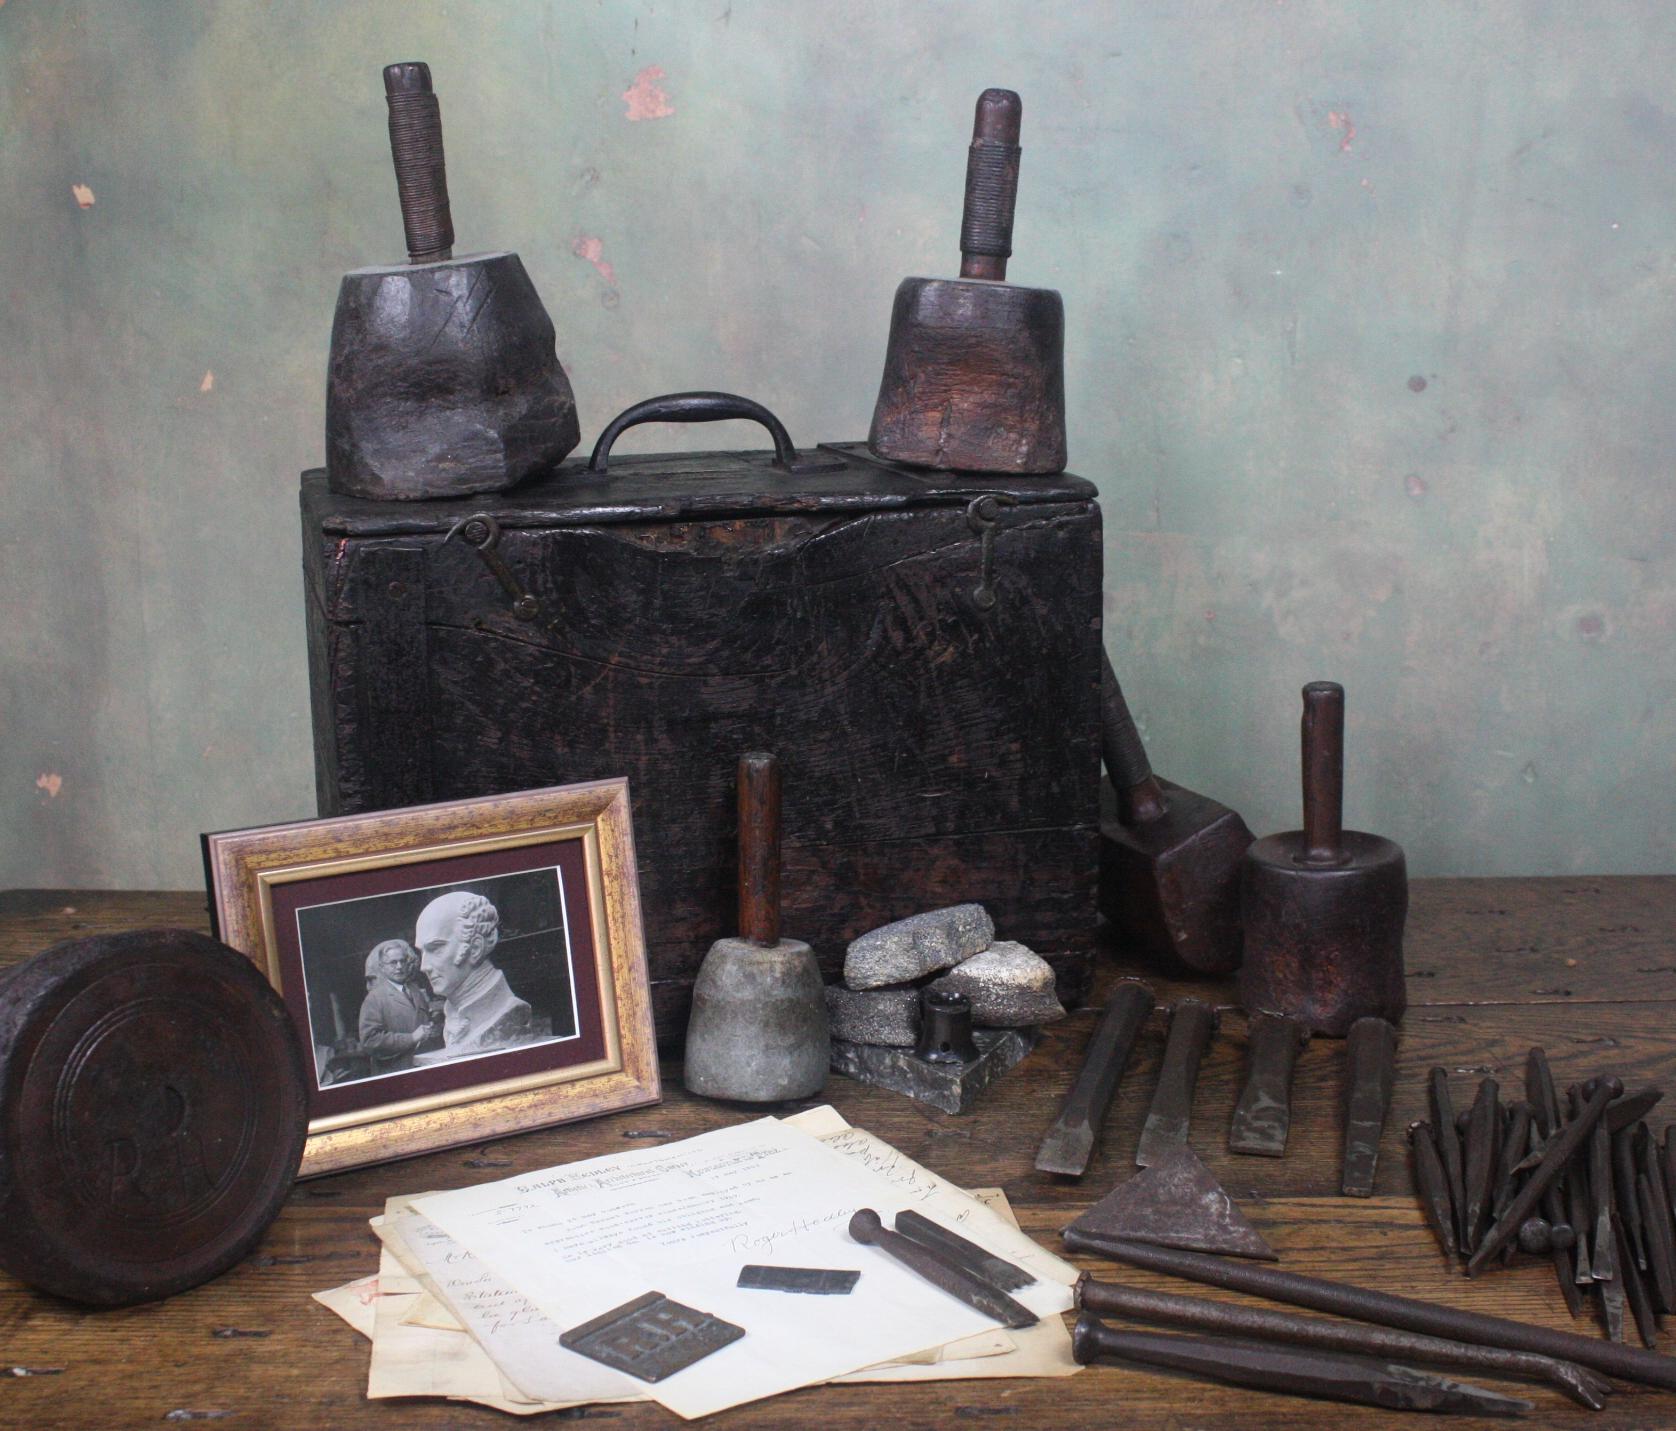 A collection of tool from the family of master craftsmen the Hedley's 

Ralph the father founded the business in 1869, he was the well-known painter who exhibited at the Royal Academy for 30 years.

They where situated in Newcastle and obviously